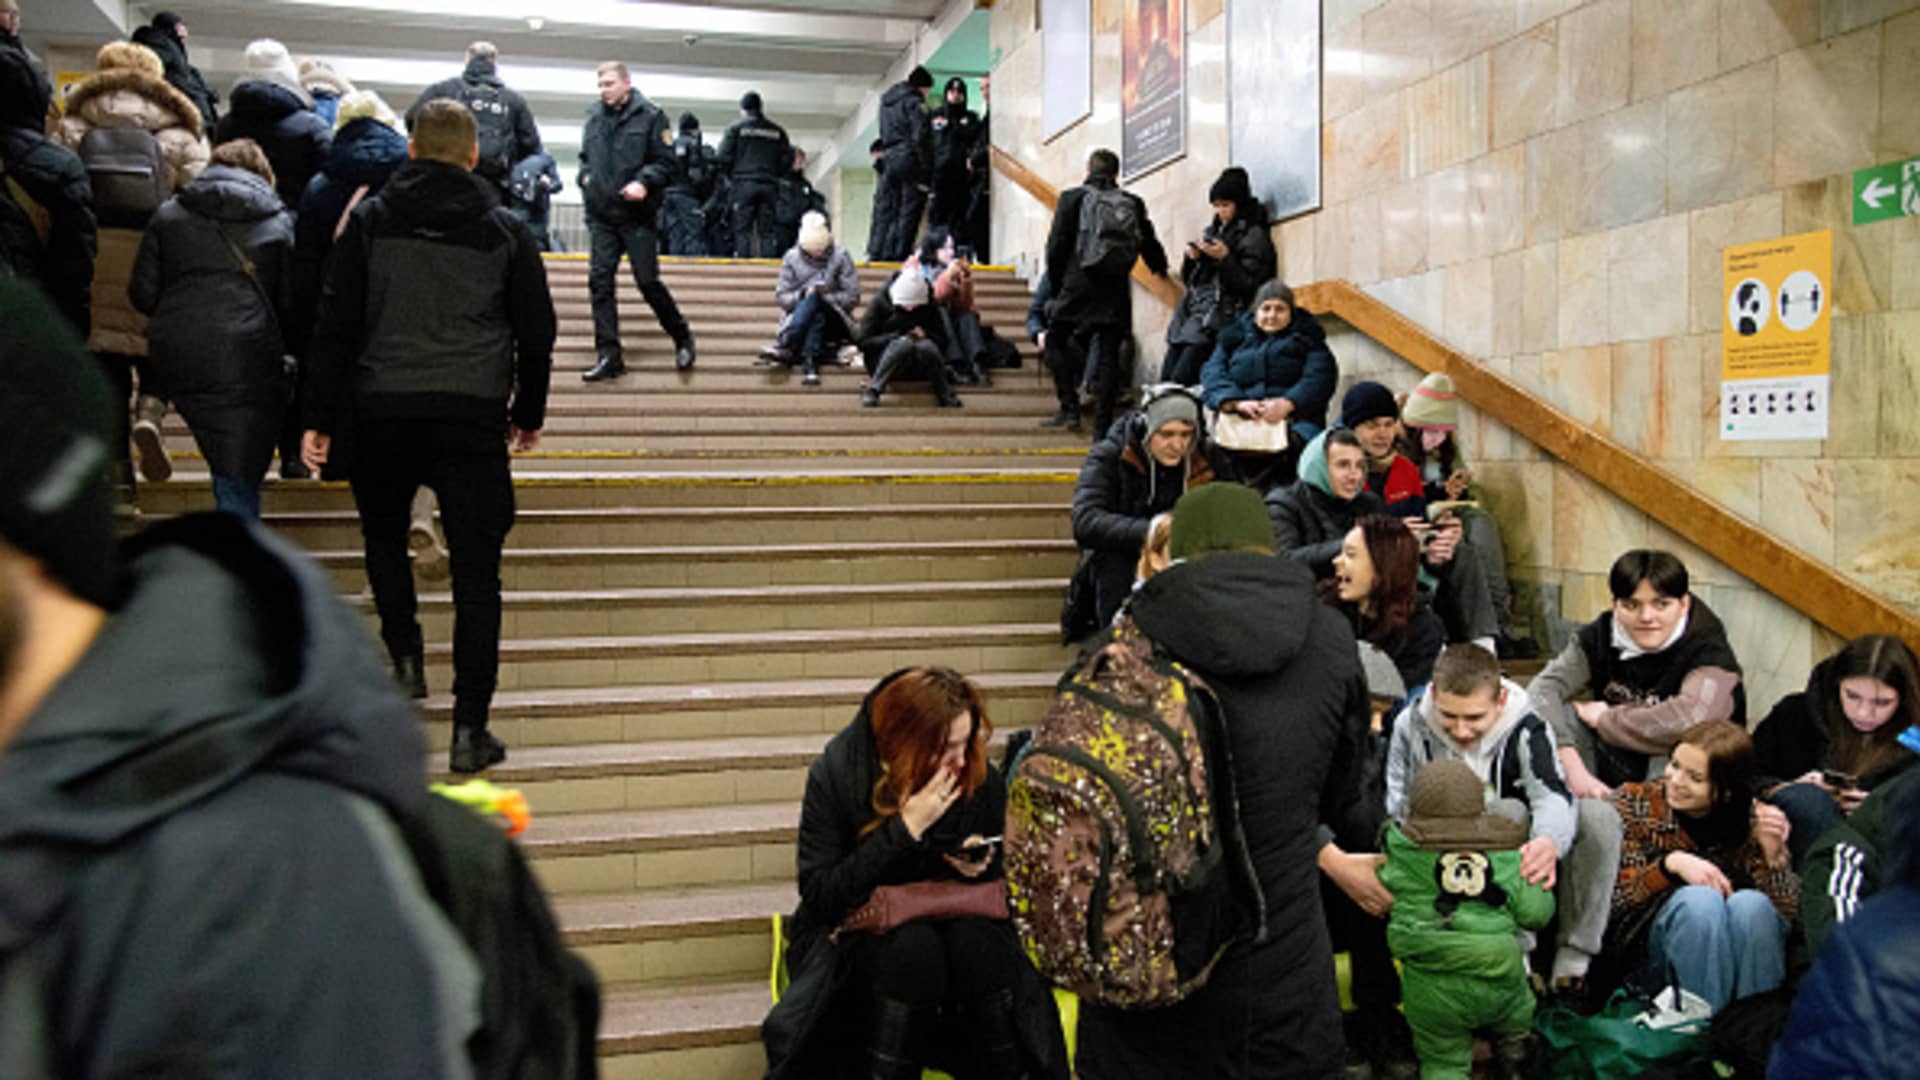 Ukrainian citizens take shelter inside a metro station during a rocket attack in Kyiv, Ukraine on February 10, 2023.